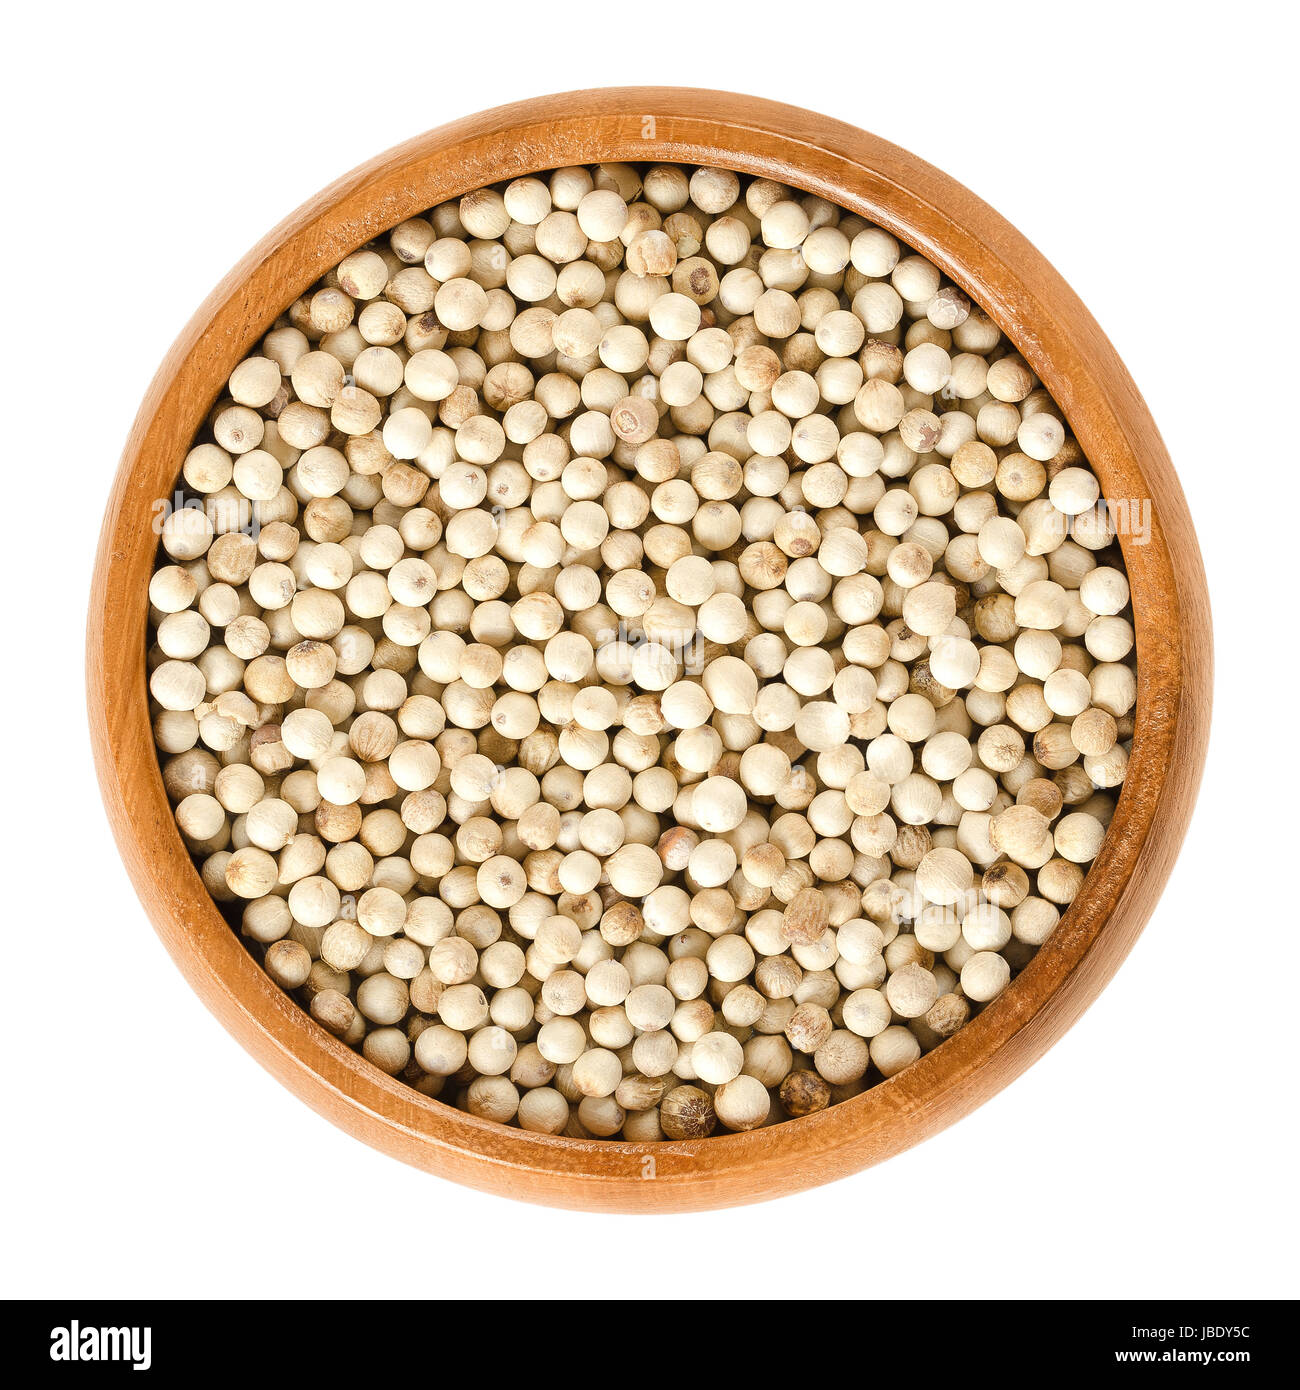 White pepper in wooden bowl. Dried berries of Piper nigrum, called peppercorns. Seed of pepper plant without darker-coloured skin. Spice. Stock Photo